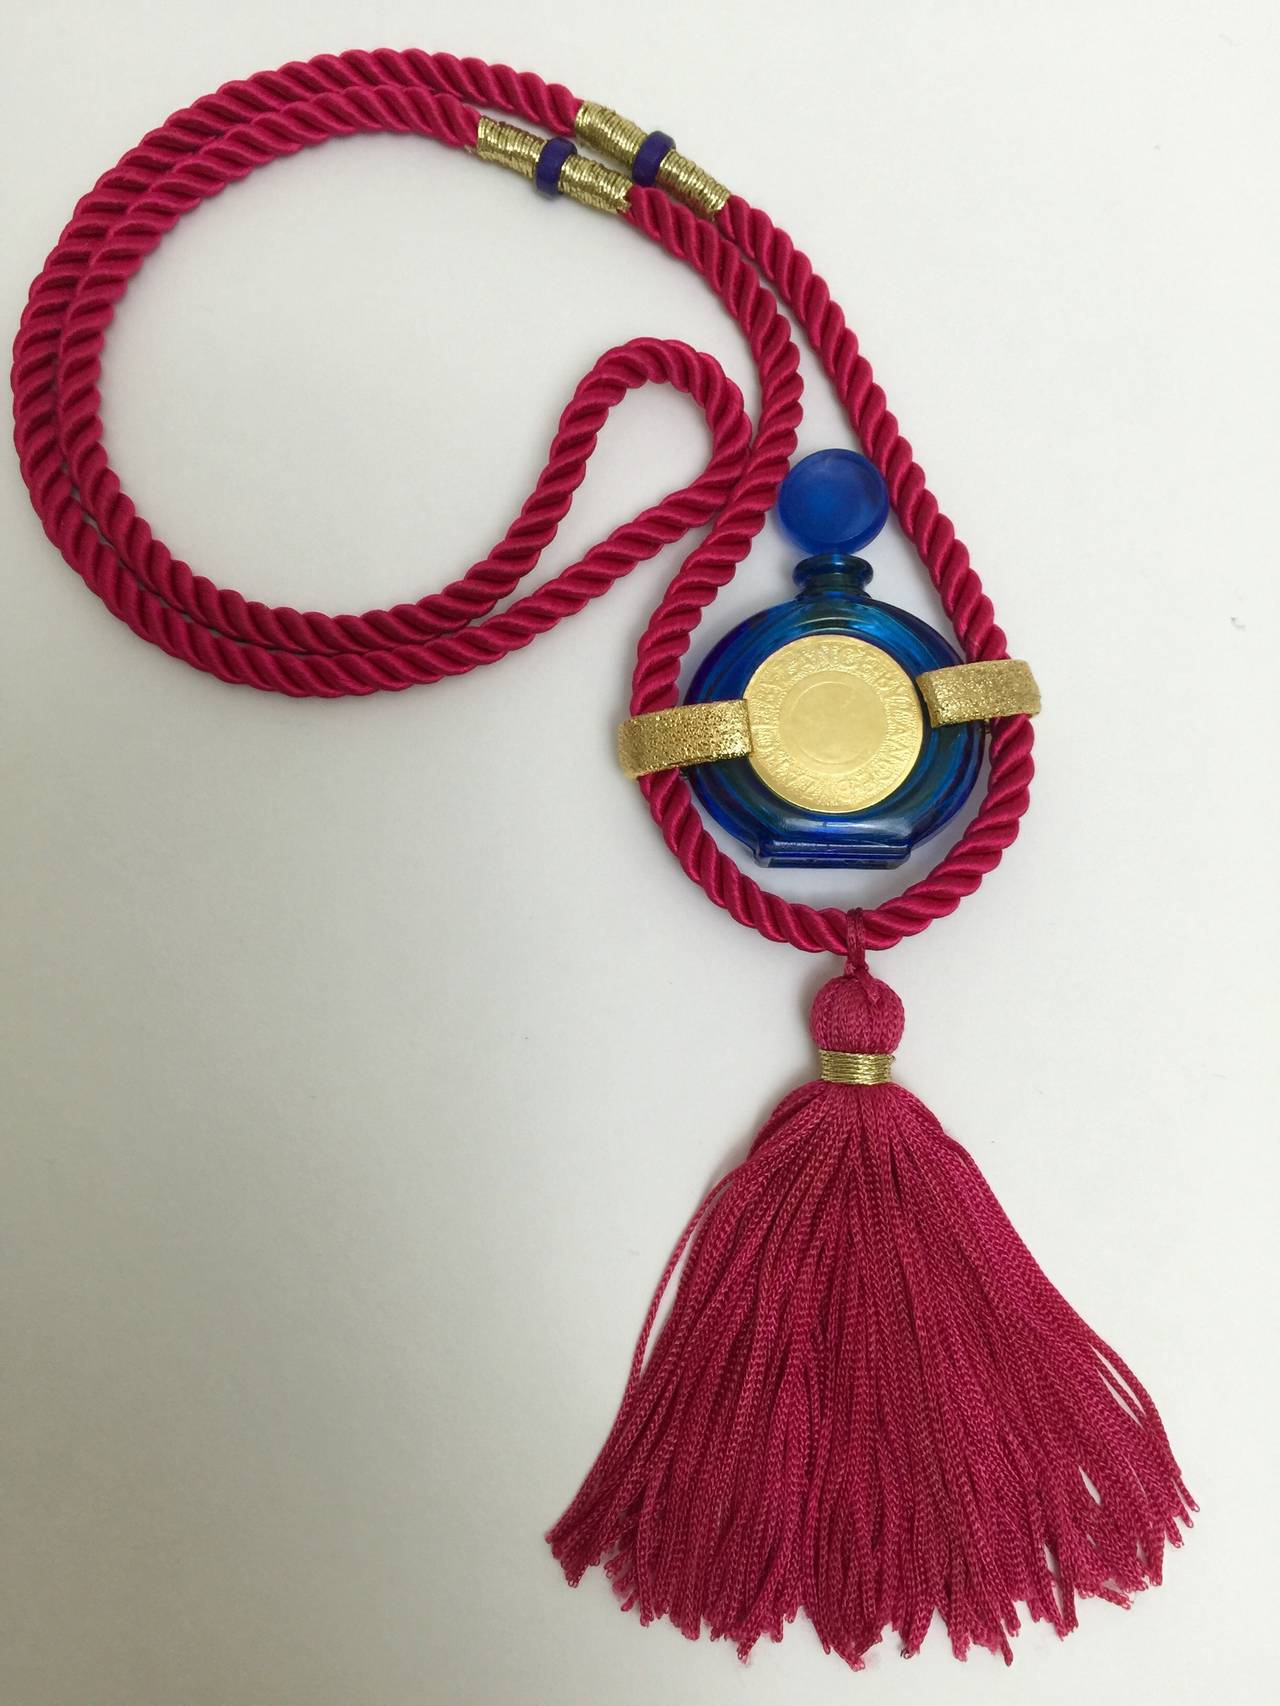 Beautiful vintage Rochas  tassel perfume necklace.
I love the combination of the fuchsia pink silk cord, and the cobalt blue miniature perfume bottle. with all of the little gold metal details. 
The center of the bottle has textured round gold